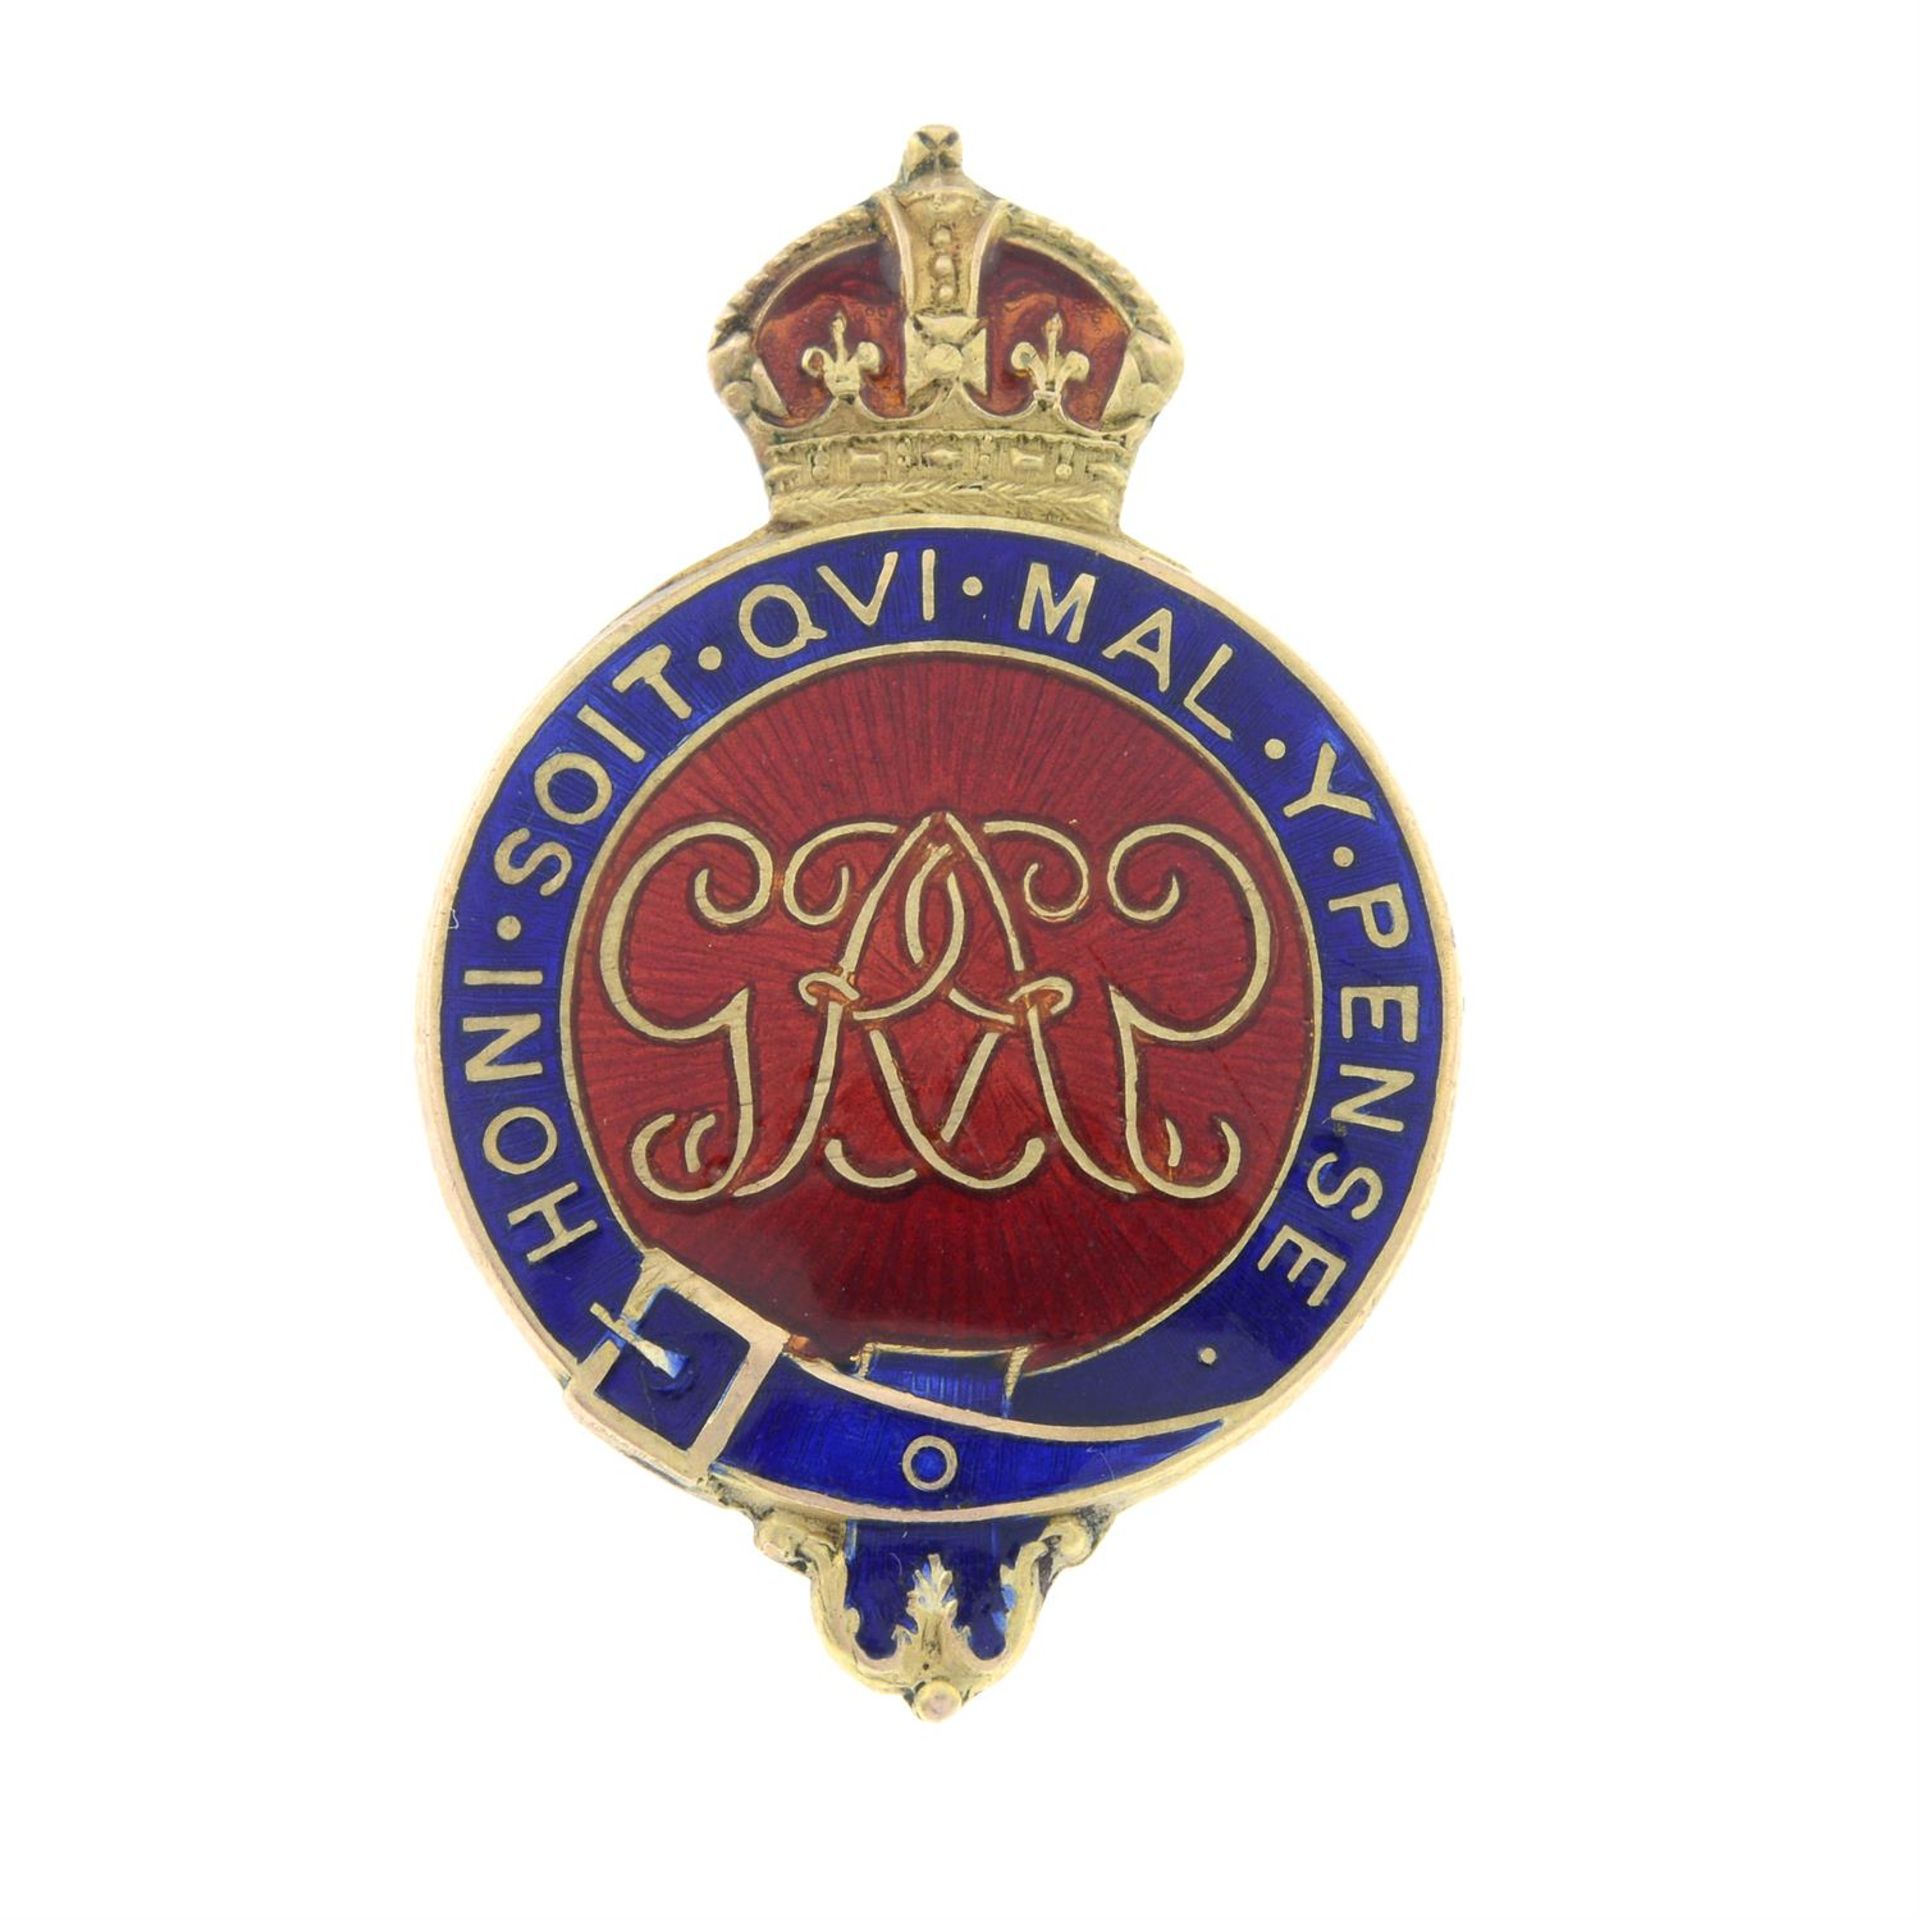 An early 20th century gold enamel 'Order of the Garter' brooch.